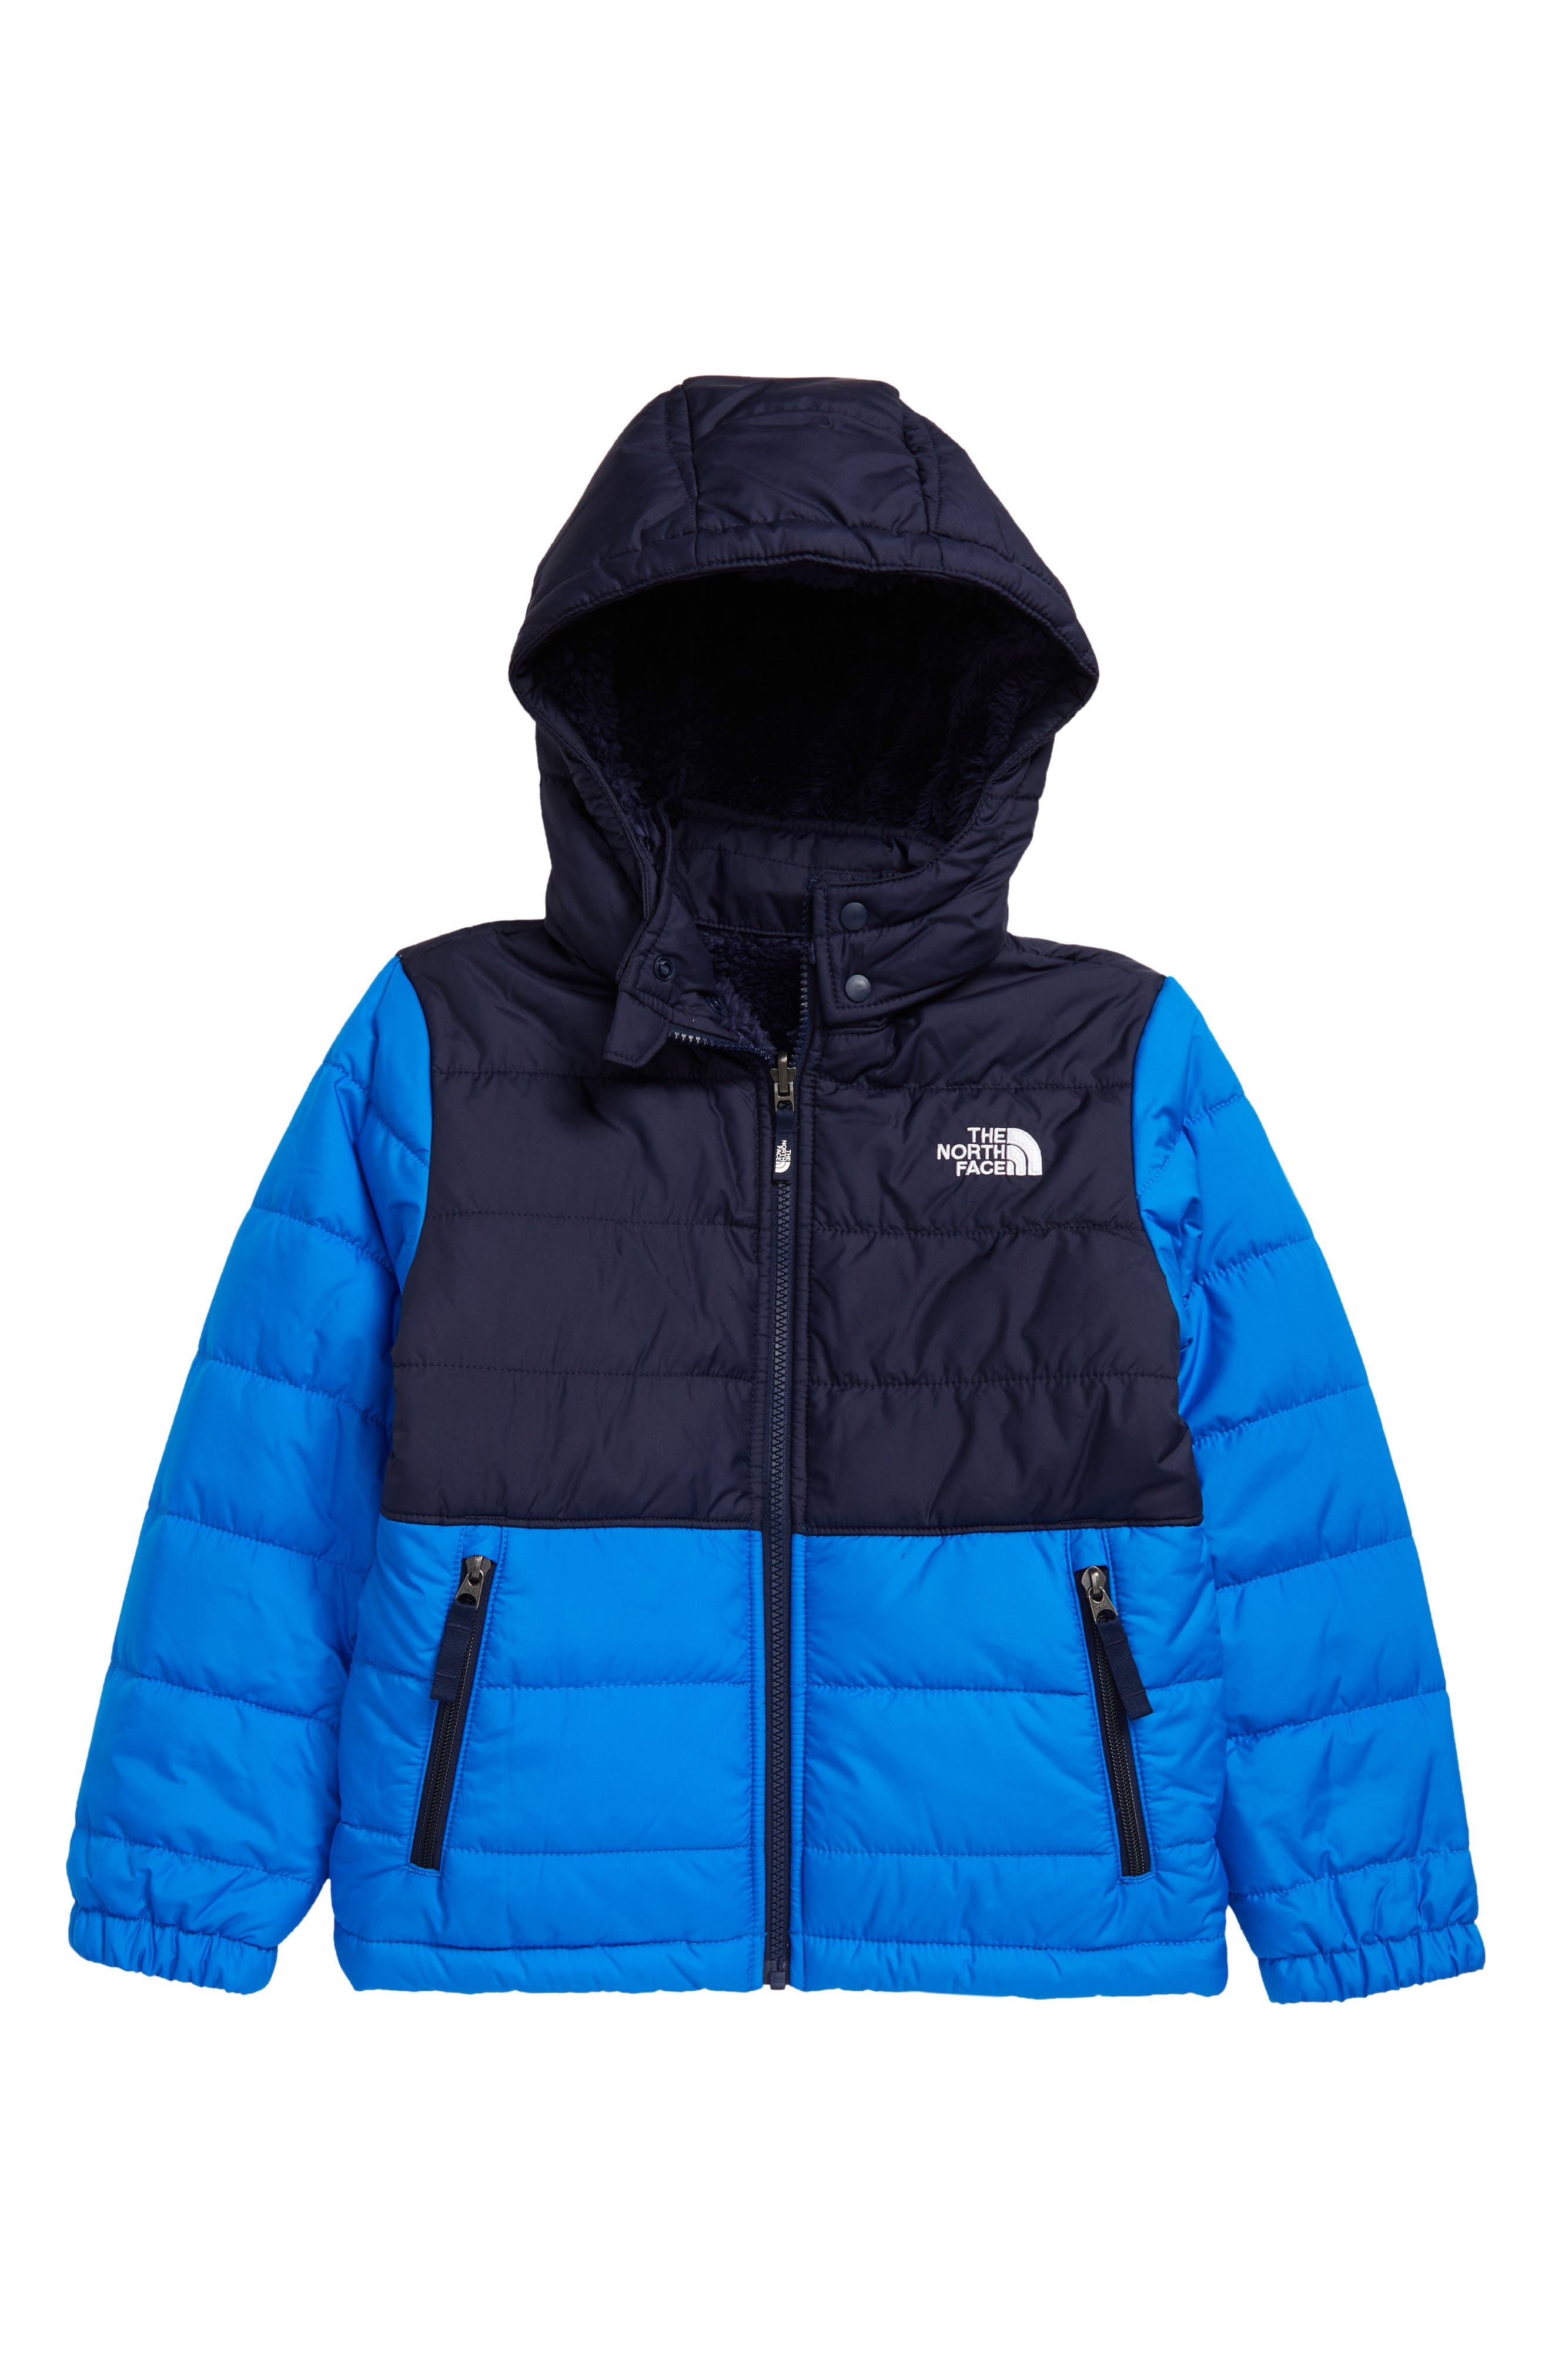 north face puffer jacket boys